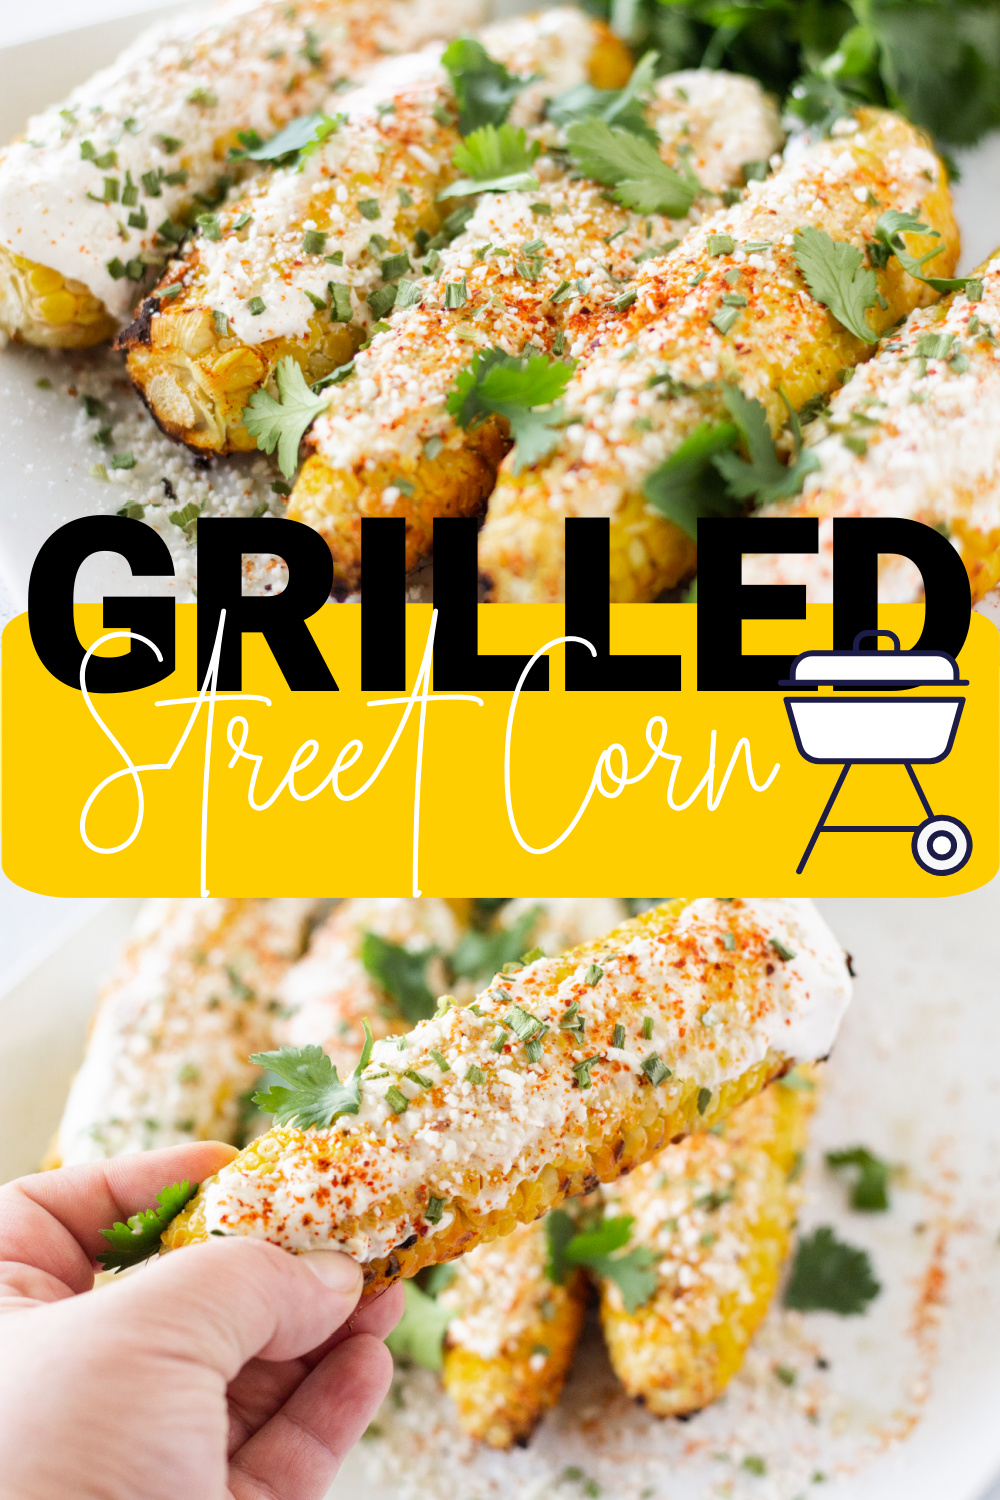 Grilled Corn on the Cob in Foil with Mayo, aka Grilled Mexican Street Corn or Grilled Elotes, is sweet, smoky, creamy, & tangy. #corn #elotes #streetcorn #recipes #grill